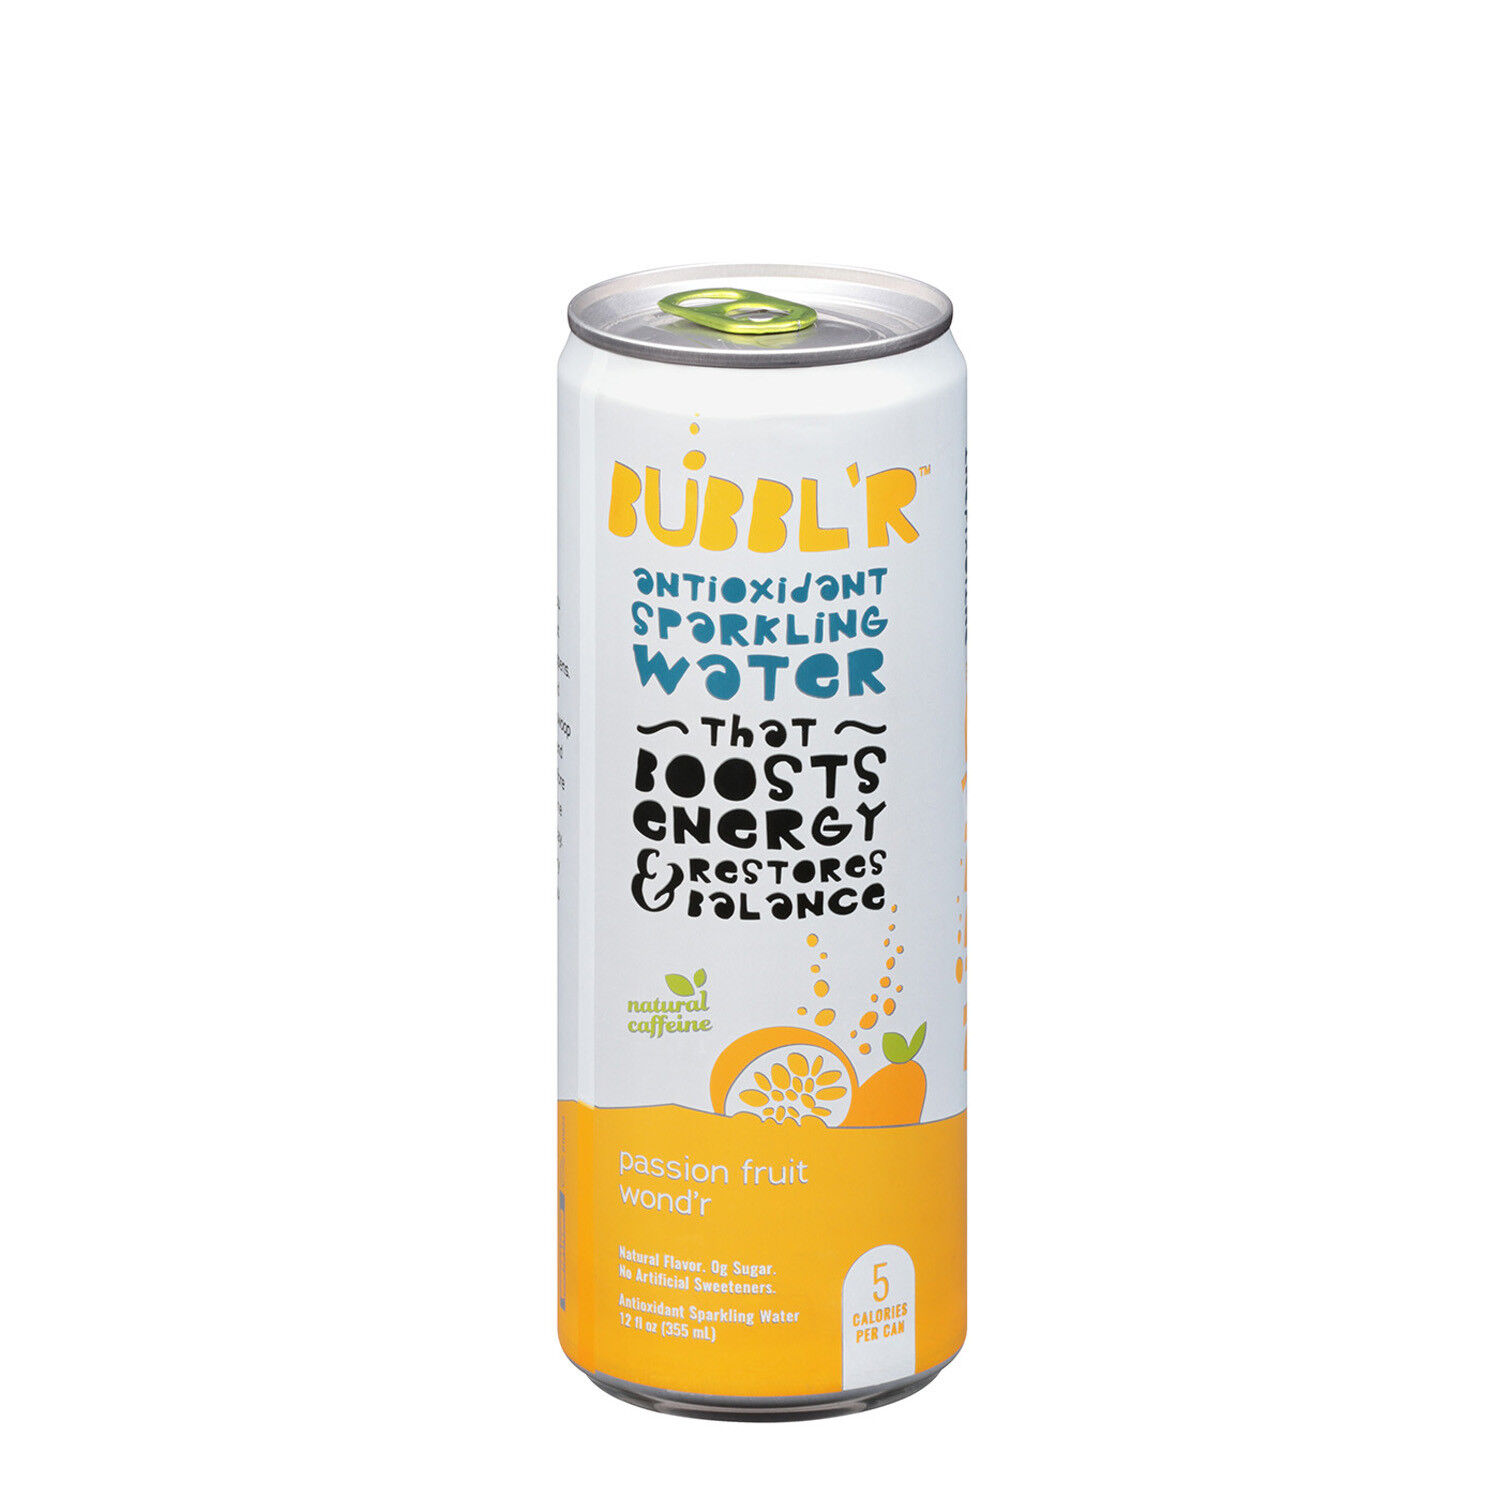 Antioxidant Sparkling Water, Passion Fruit Wond'r - 12oz. (12 Cans)